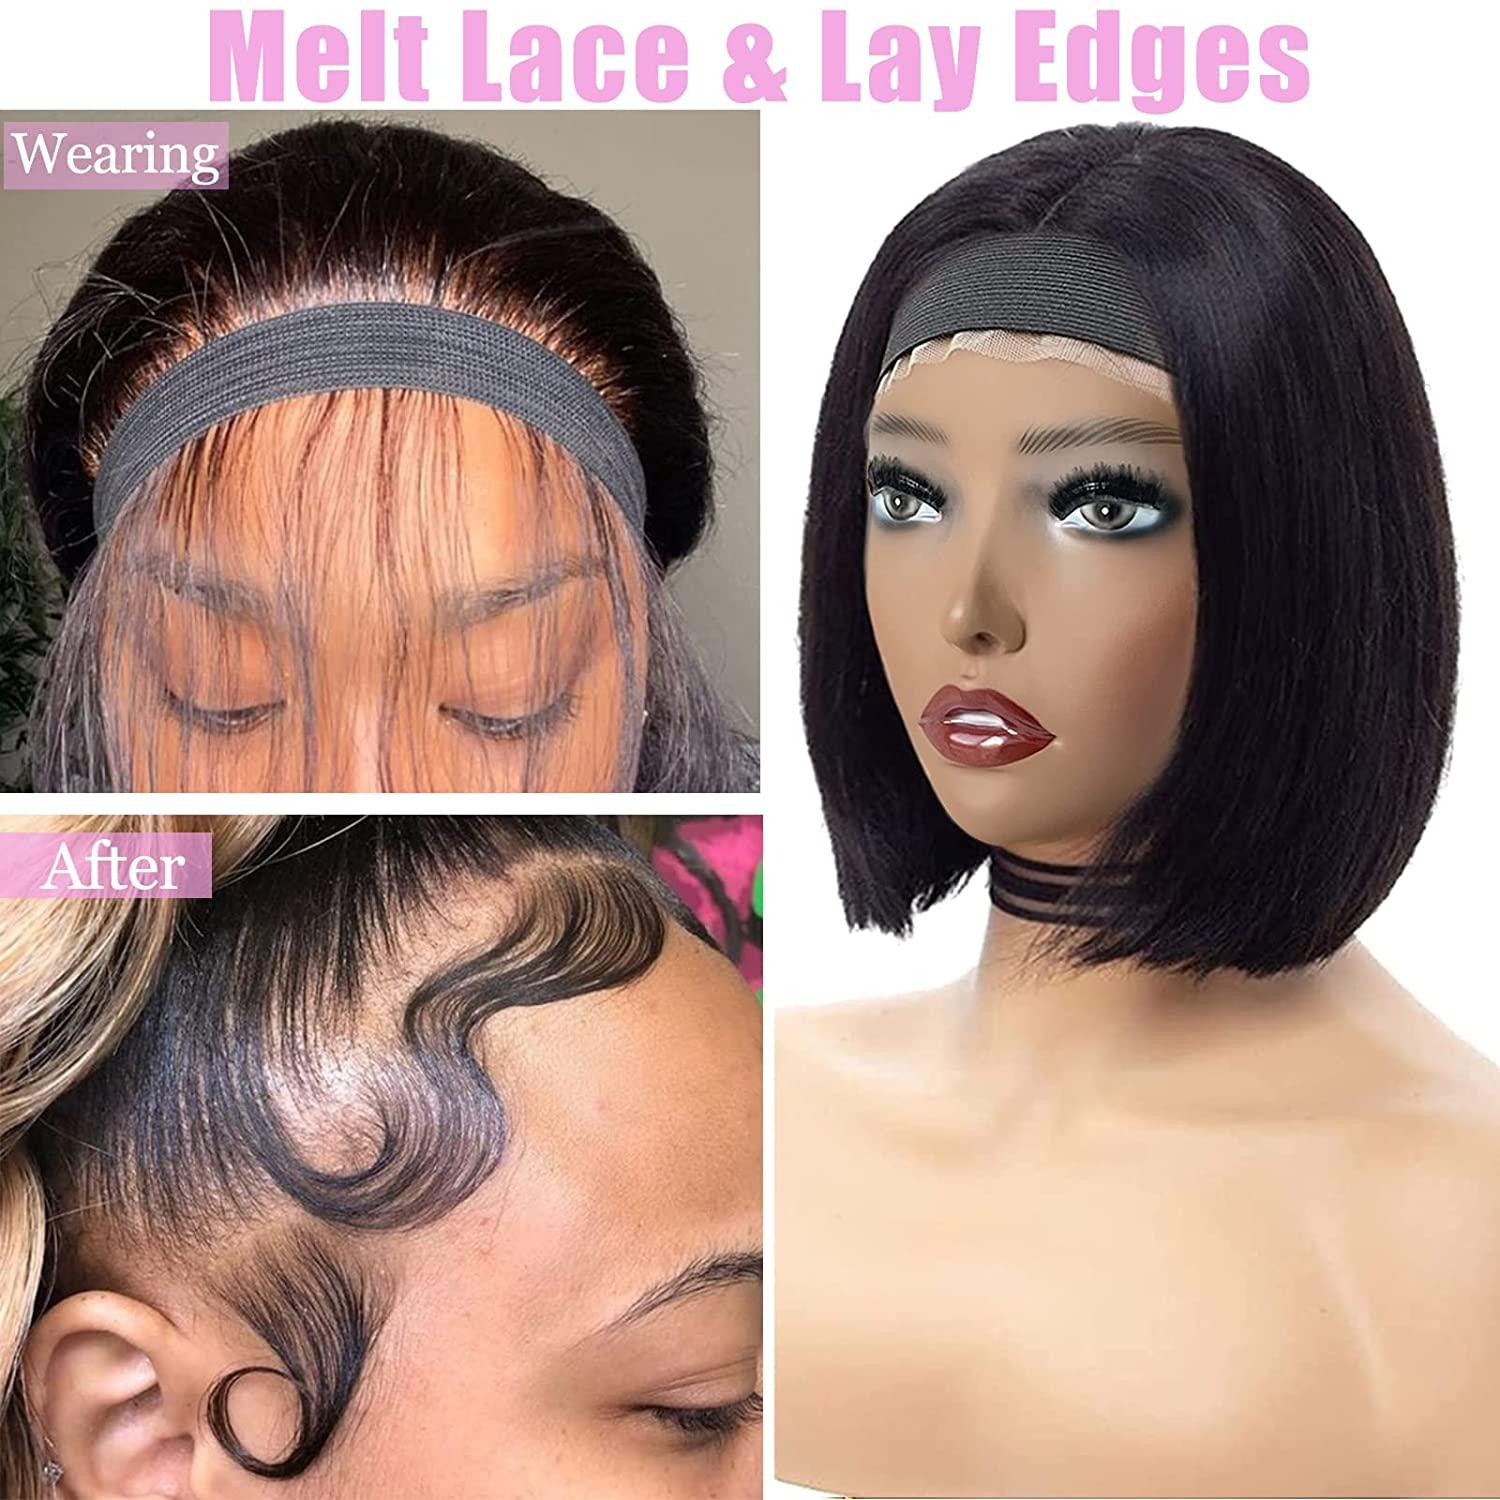 Wig Bands For Edges Lace Band With Ear Muffs Black Melting Band